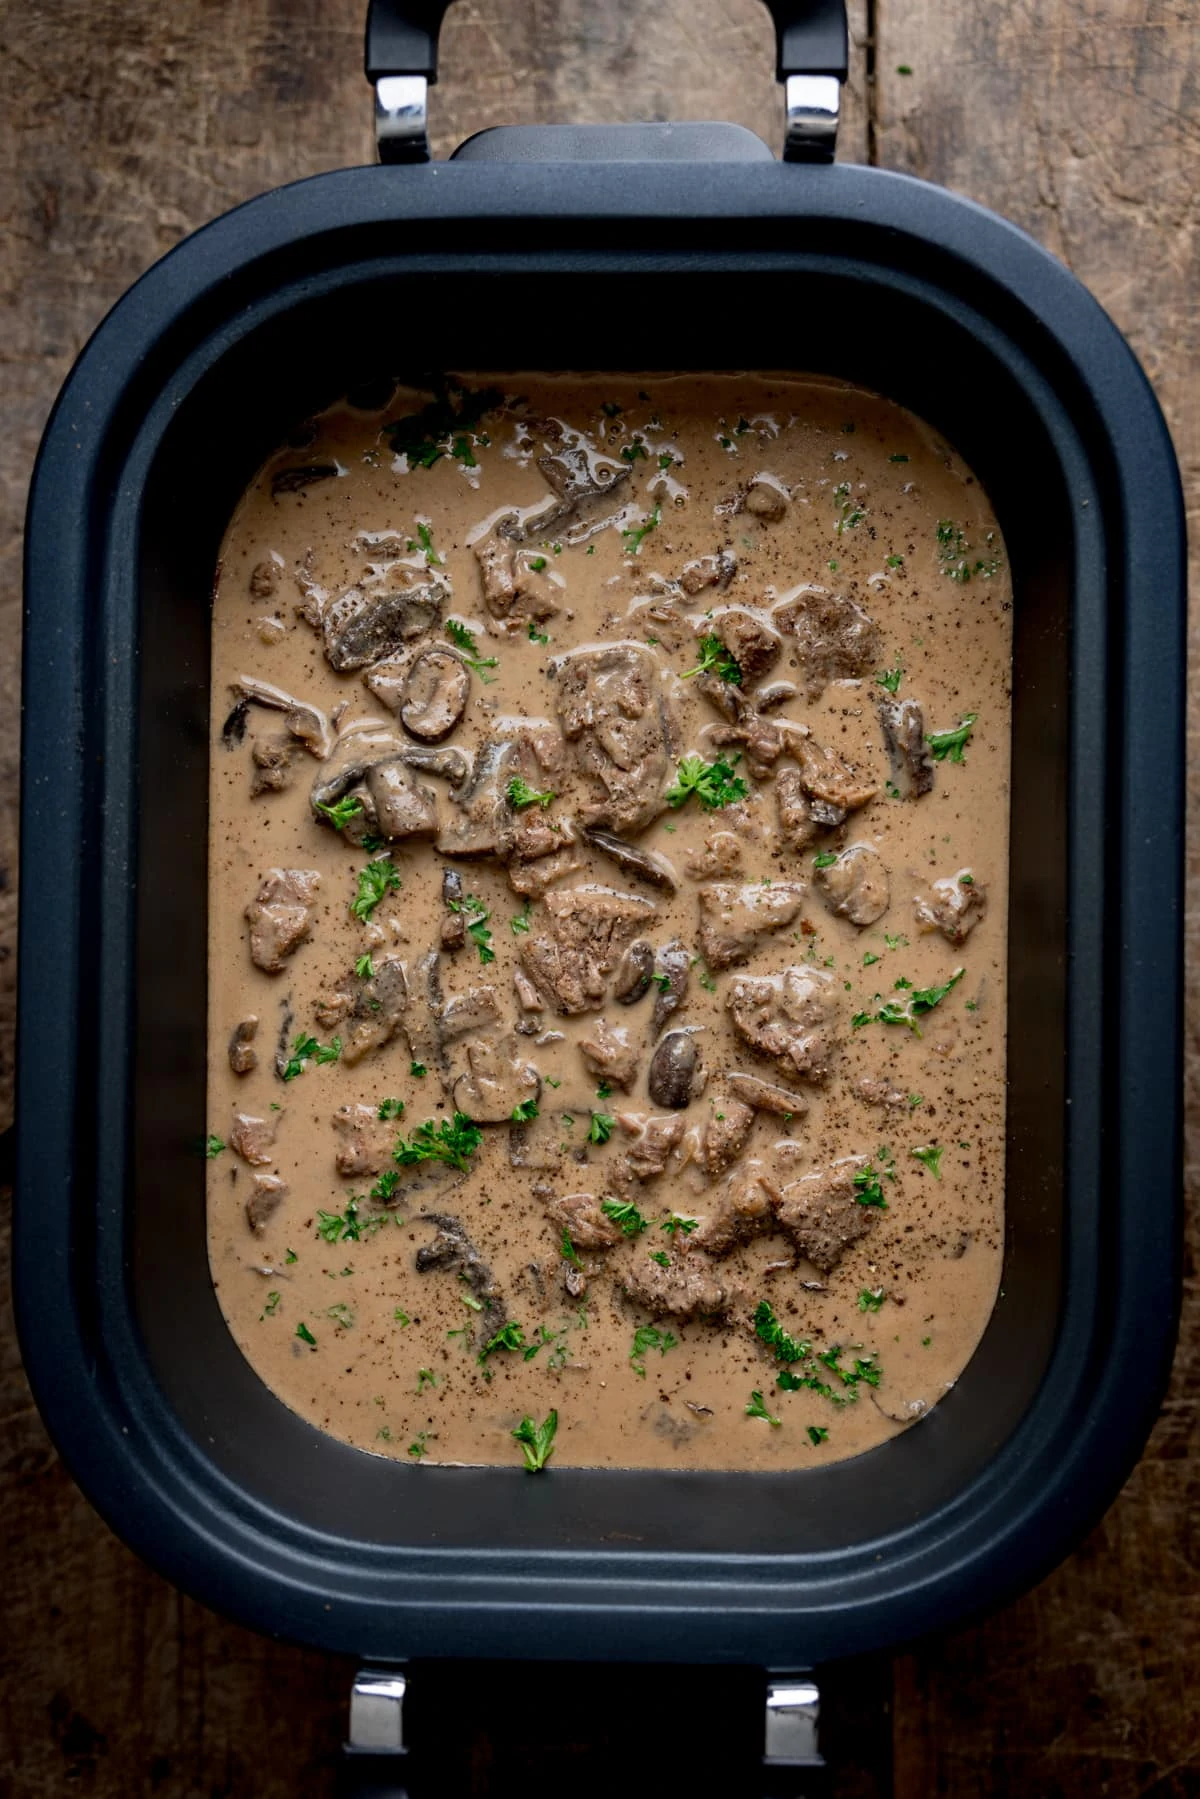 Overhead image of slow cooked beef stroganoff in a slow cooker, on a wooden table. There is parsley sprinkled on top.